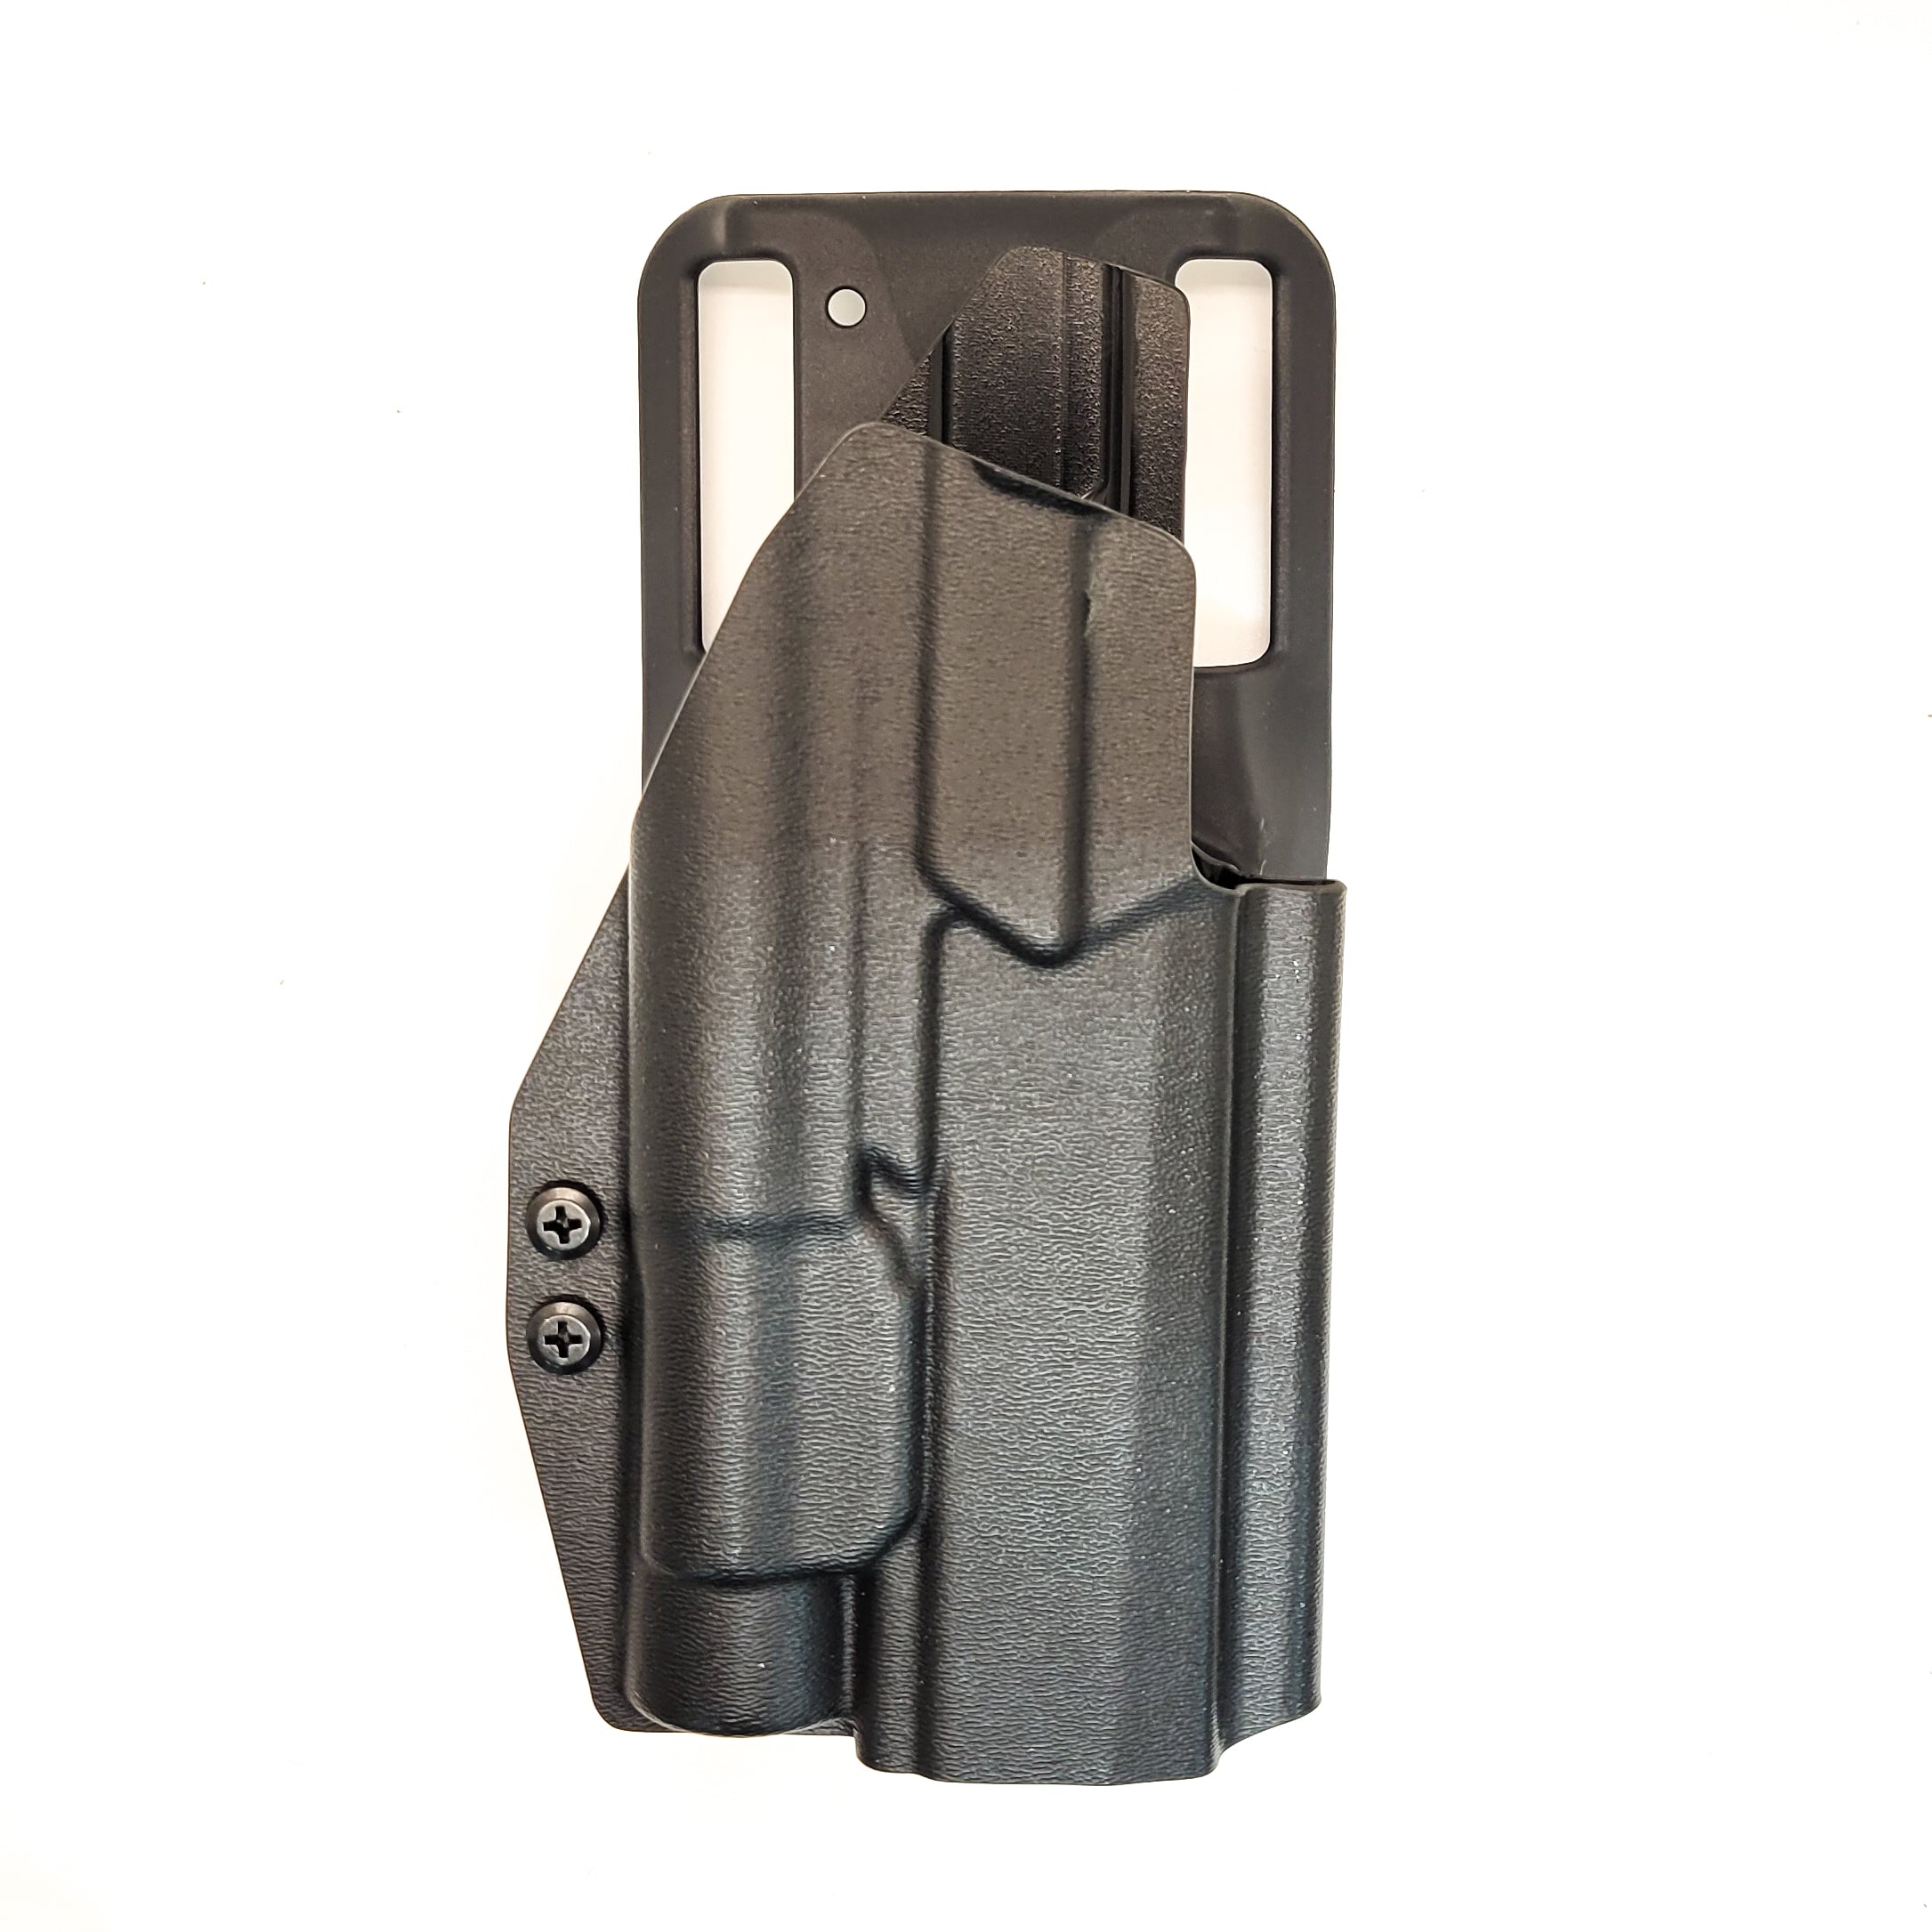 For the Best OWB Duty & Competition Style Outside Waistband Holster designed to fit the P320 AXG and AXG Pro with Streamlight TLR-1 and TLR-1HL light and GoGuns USA Gas Pedal Holster, shop Four Brothers Holsters.  Fits the Carry, Compact, M17, M18, and X-Five models using our competition belt mounting options. X5 TLR1